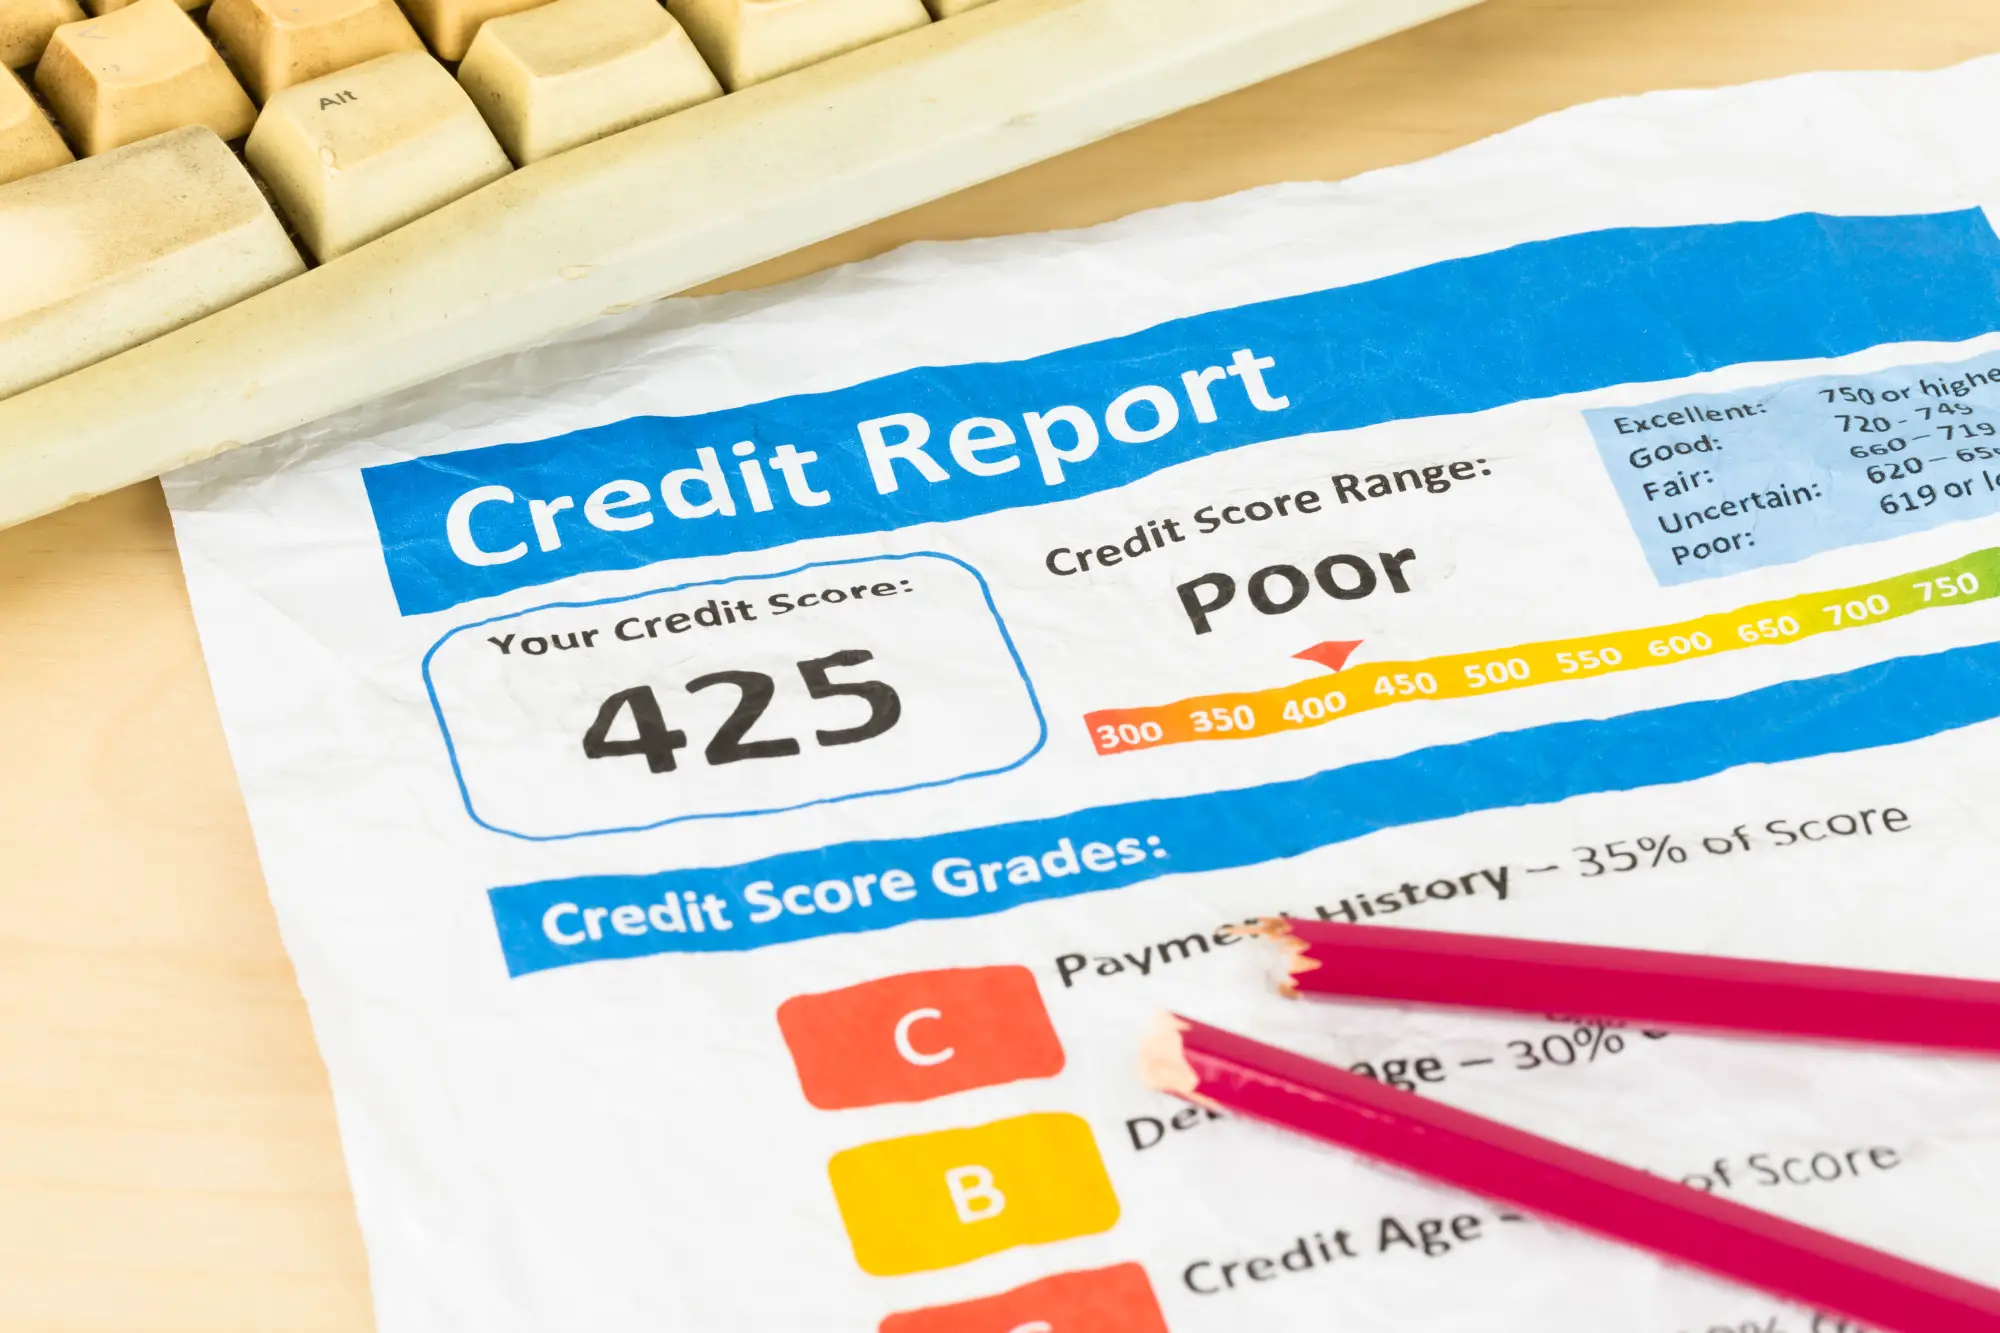 Poor credit score report on wrinkled paper with pen and keyboard